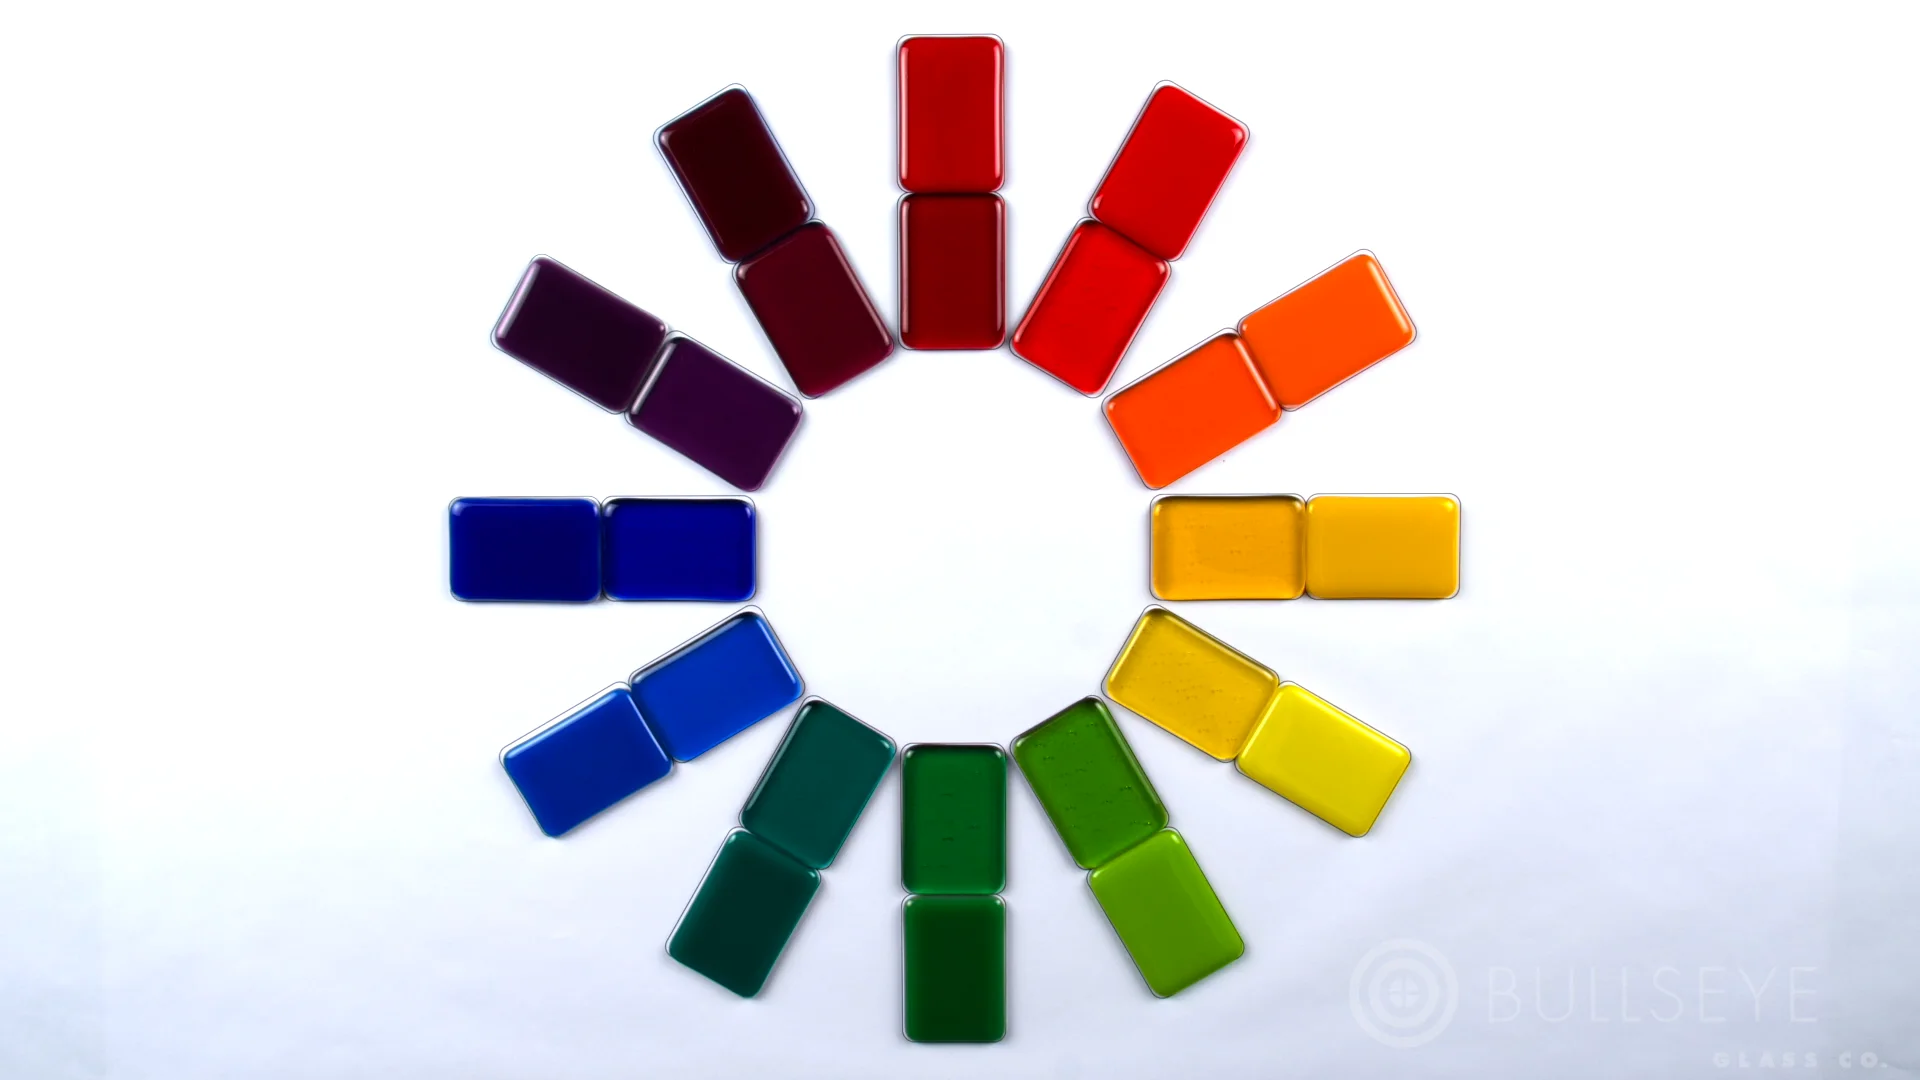 6. Pure Color Wheel A Natural Base Color vs Cool or Warm on Vimeo